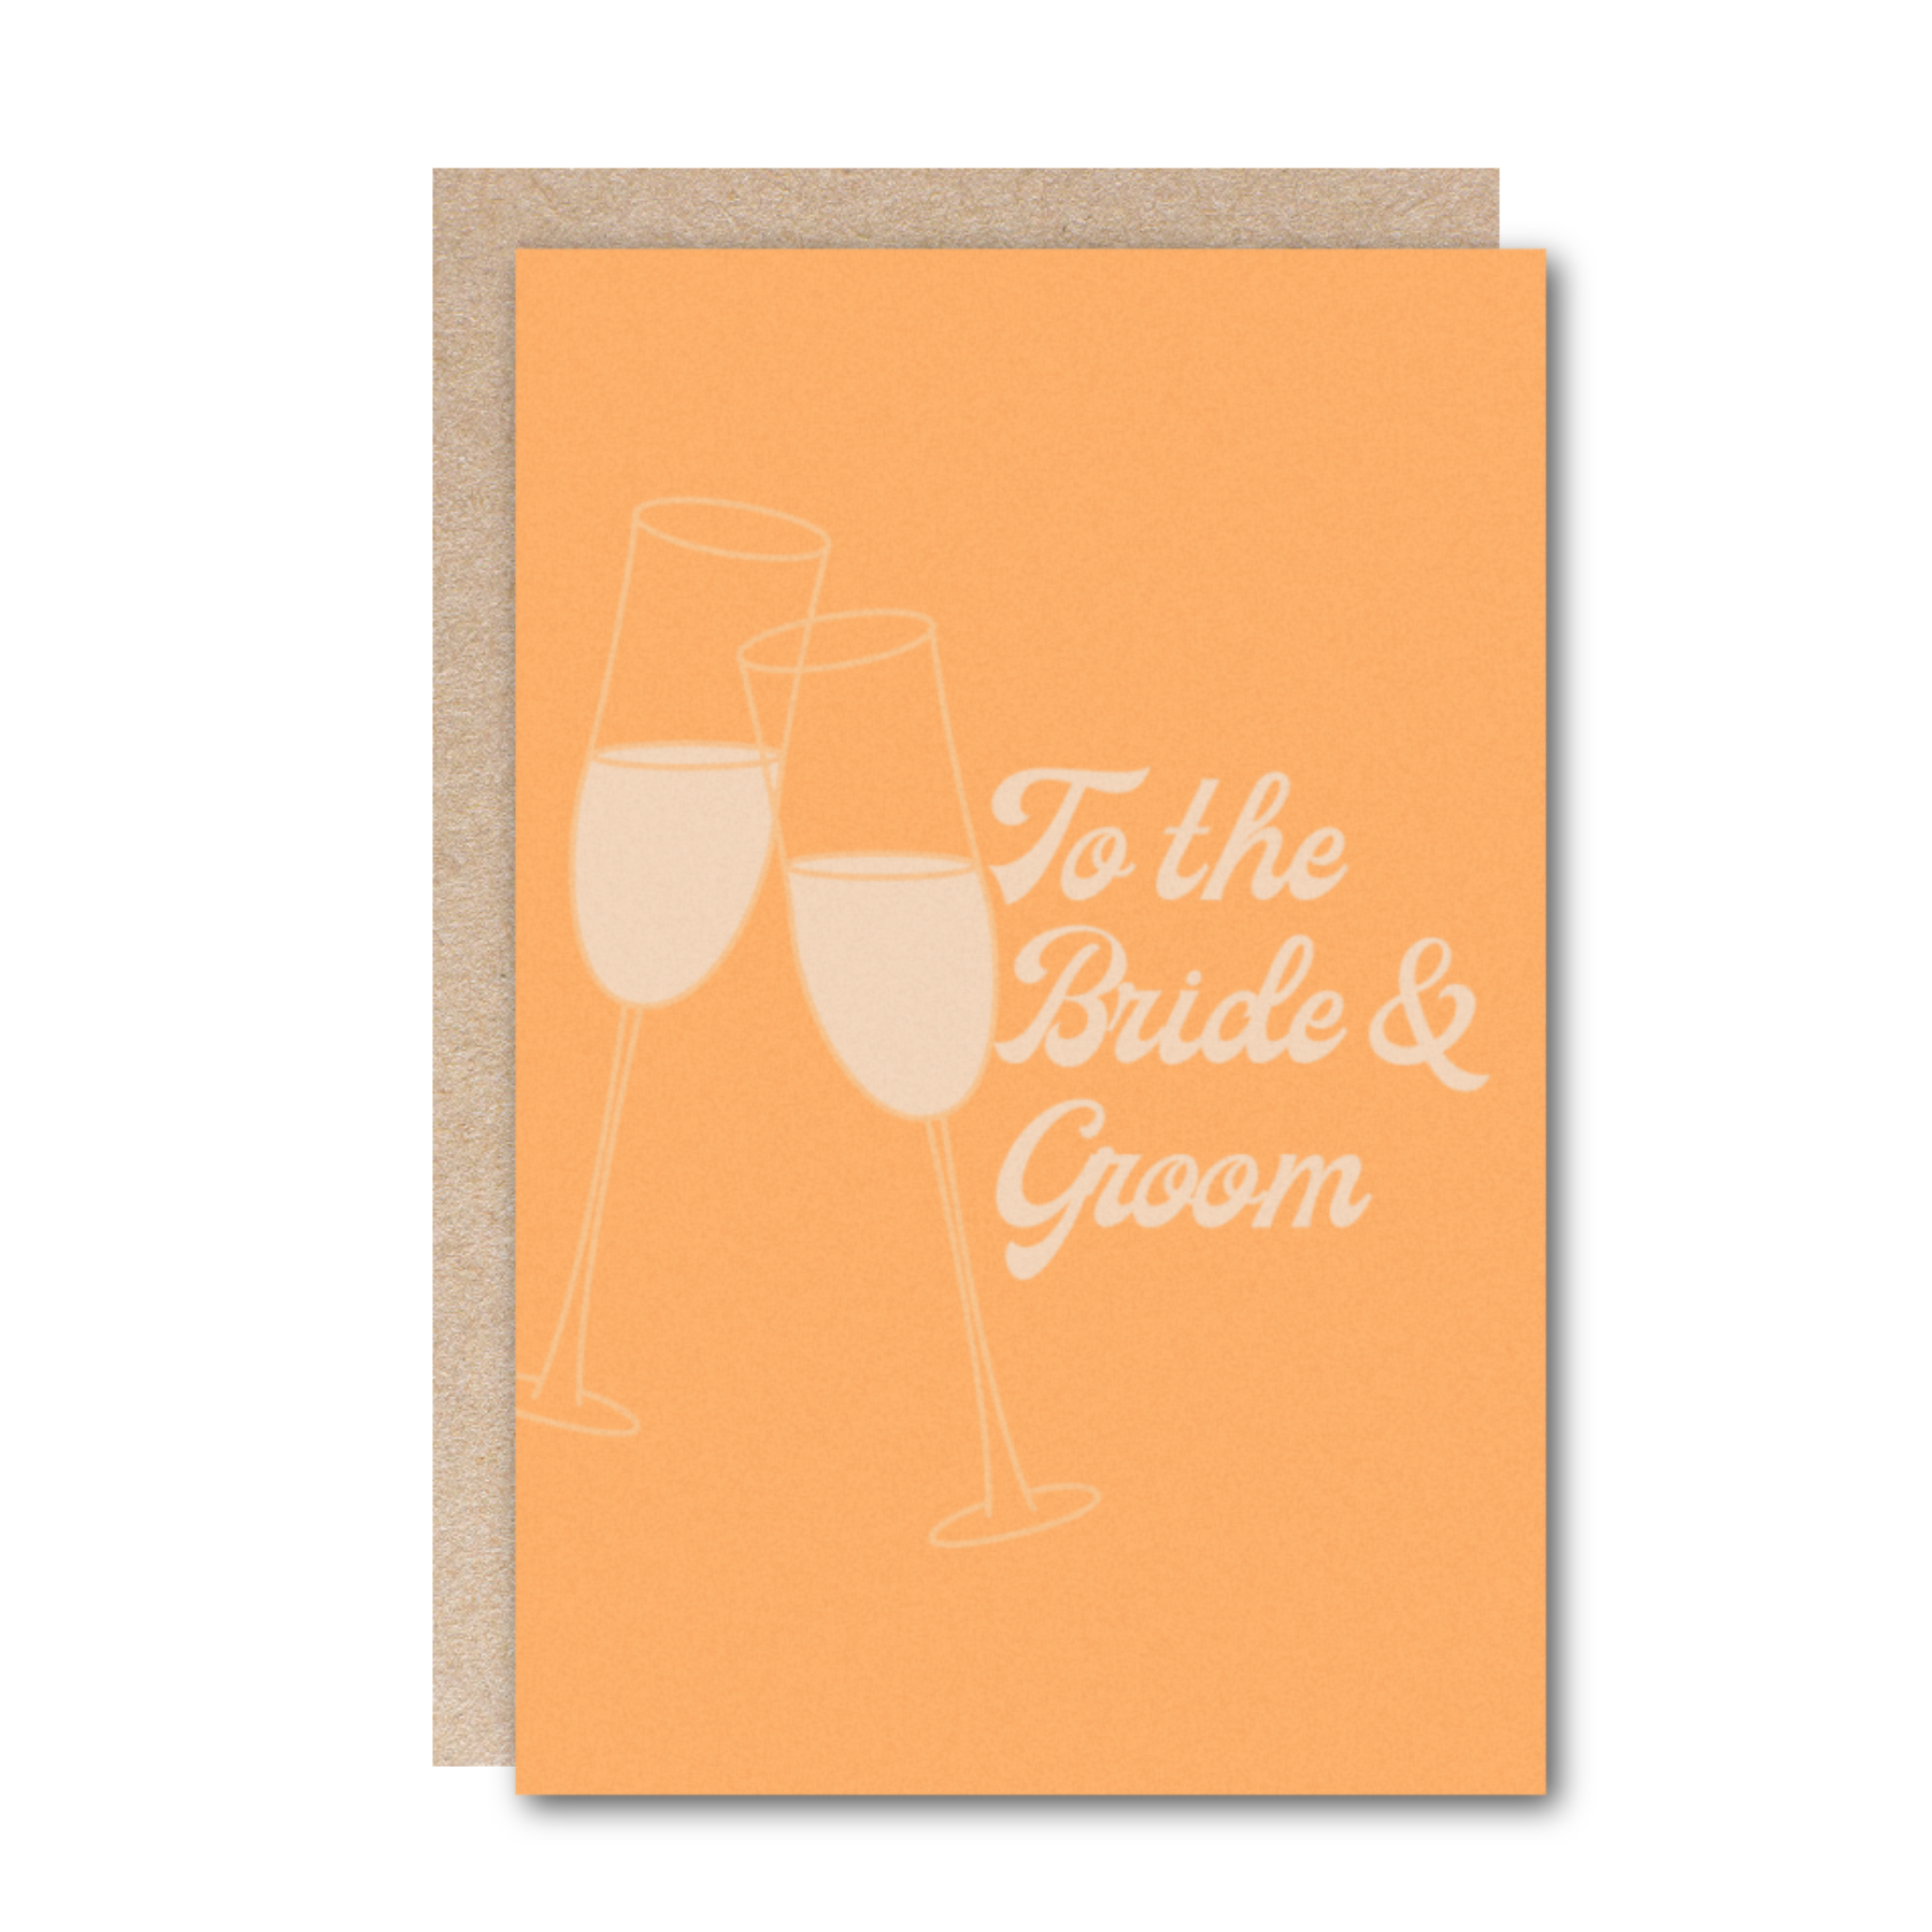 To The Bride and Groom